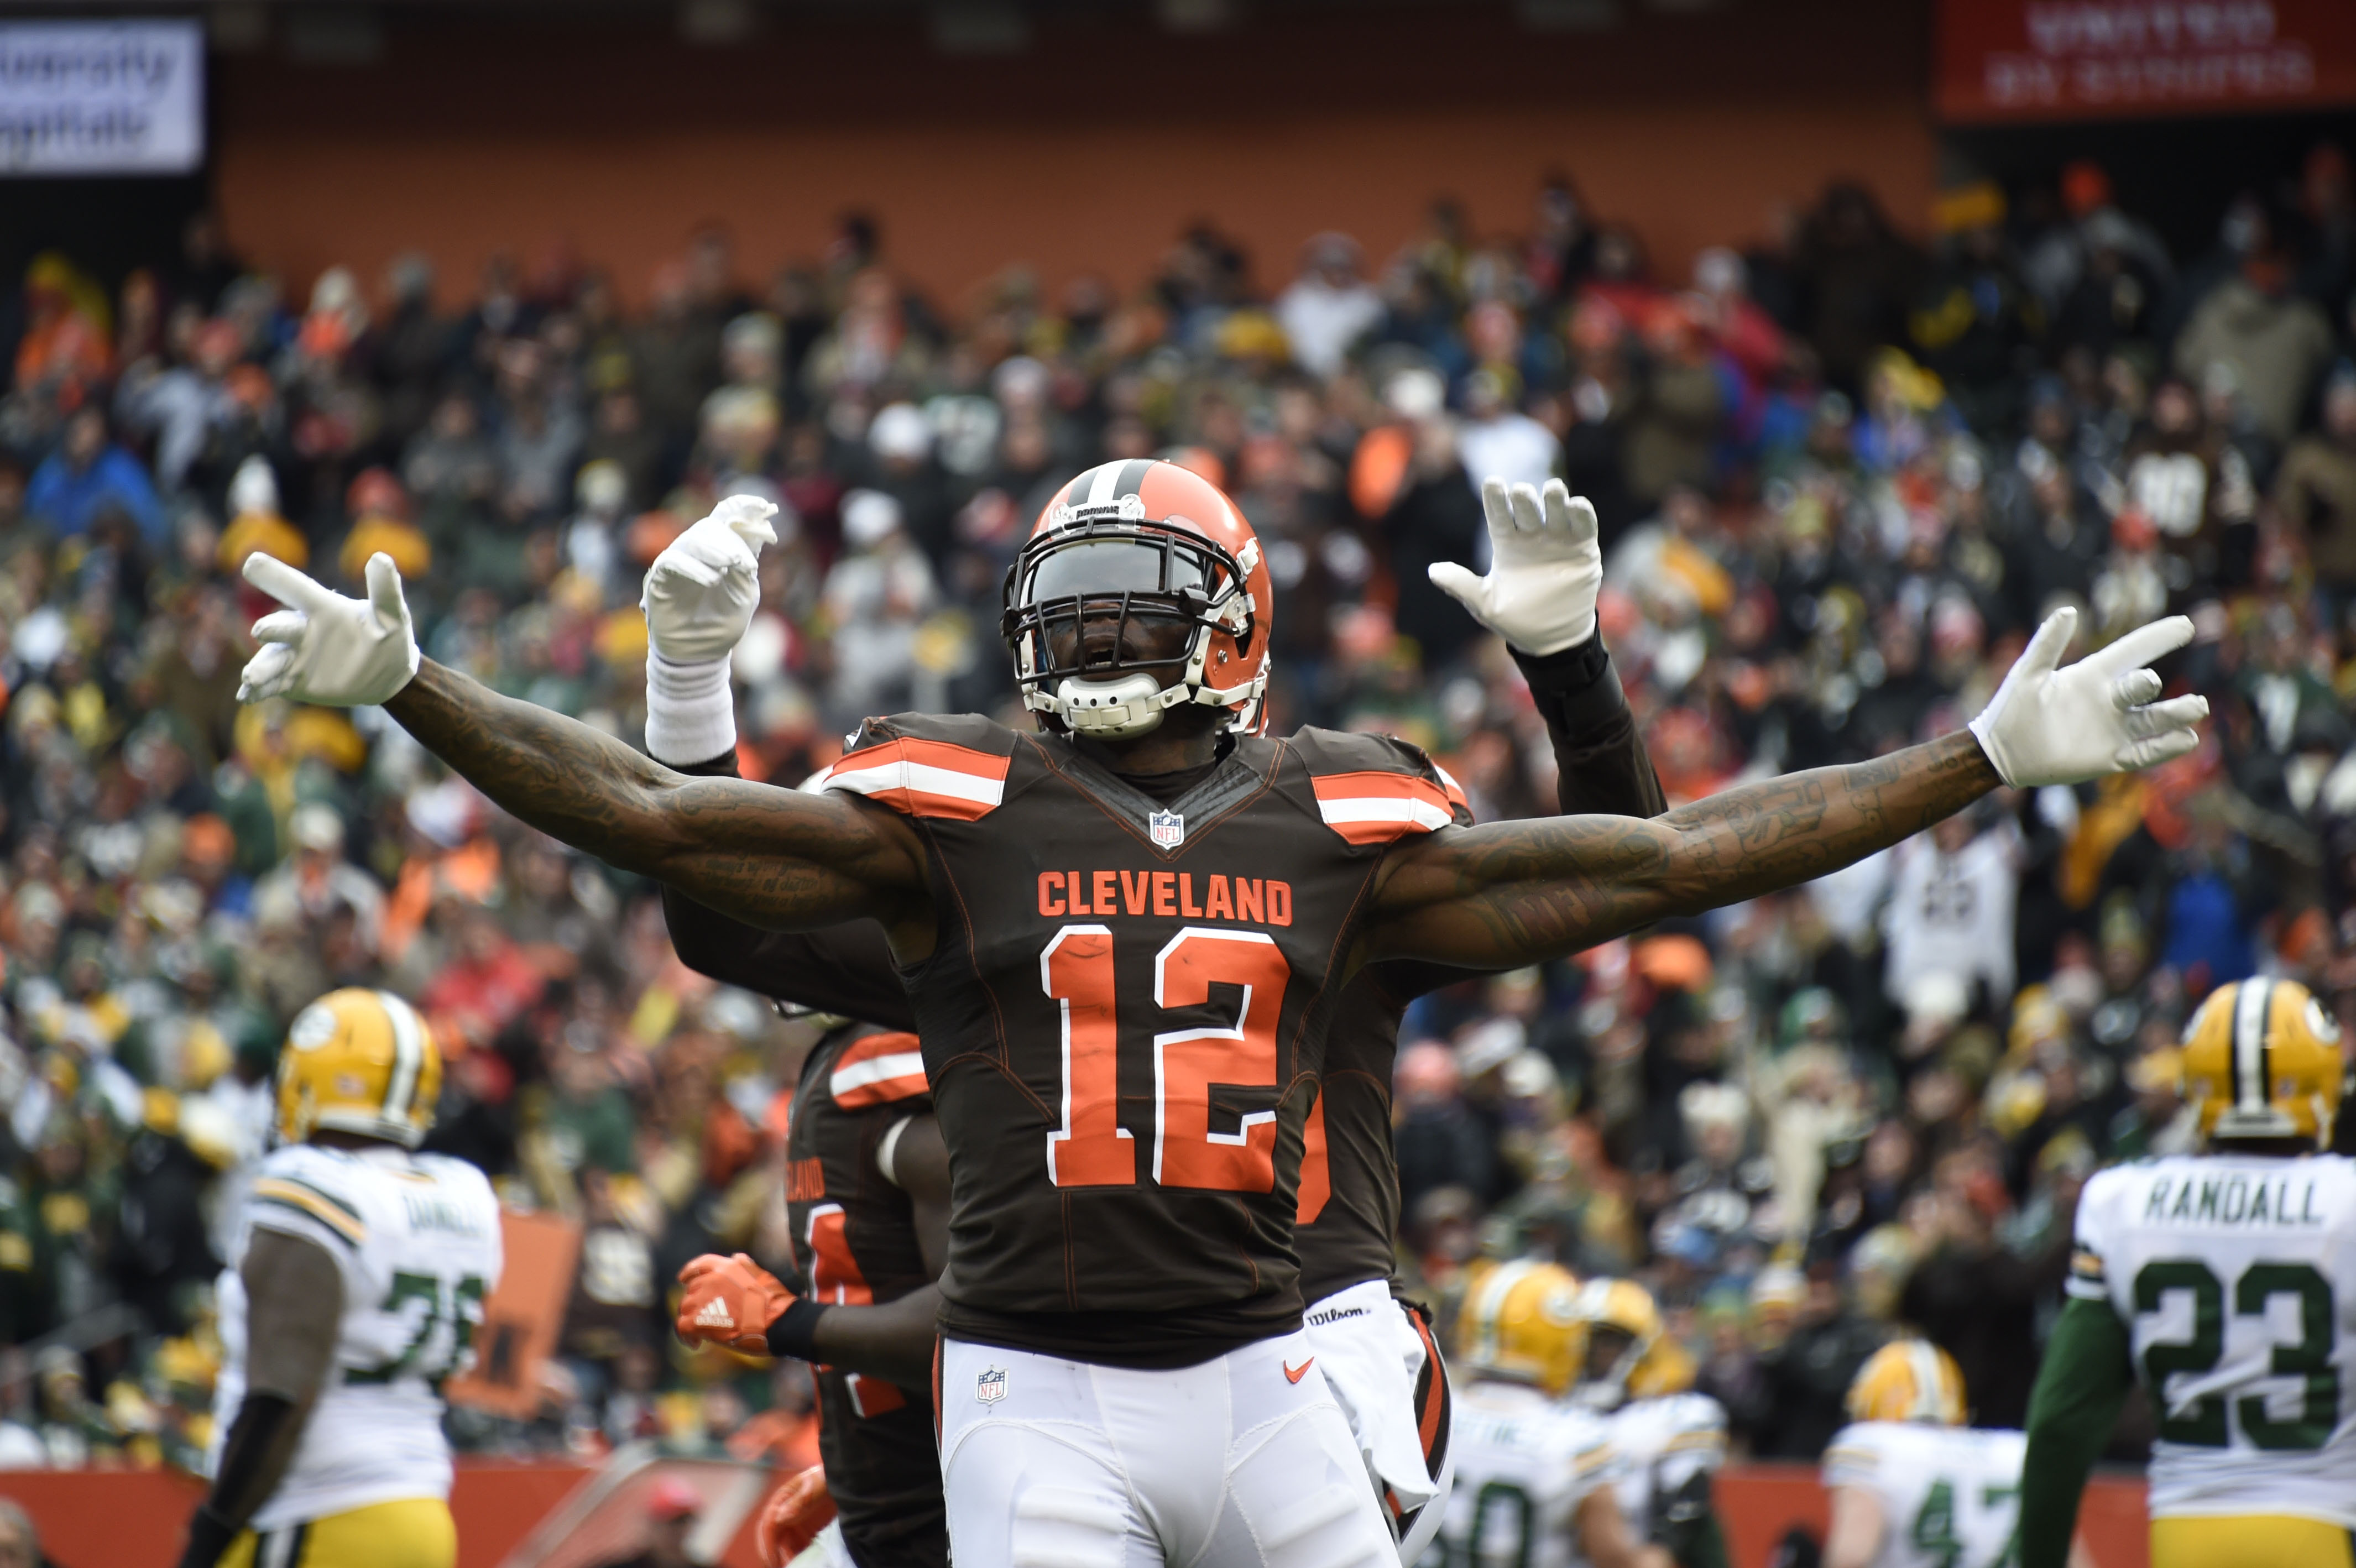 Josh Gordon has signed a contract with the Kansas City Chiefs after being reinstated by the NFL.